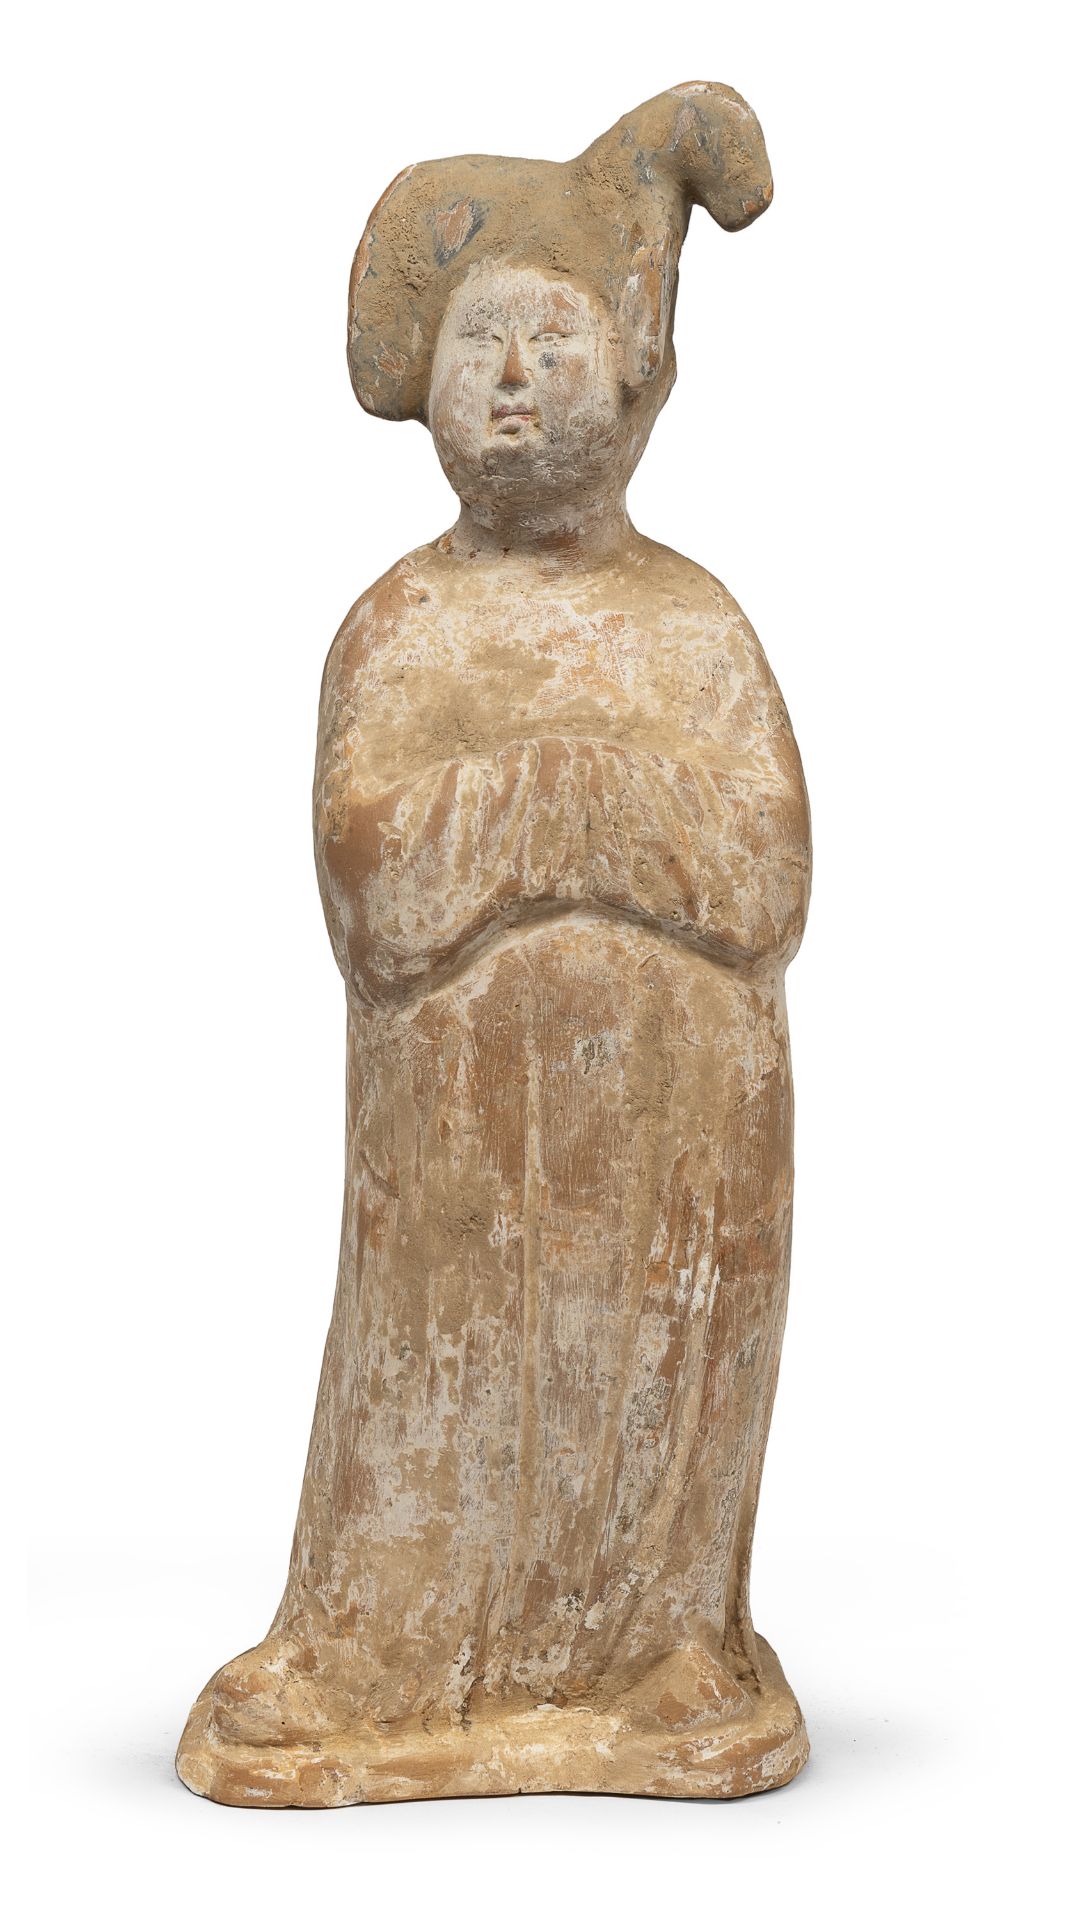 A TERRACOTTA FIGURE OF YANG GUIFEI CHINA TANG DYNASTY (618-907 A.D.)